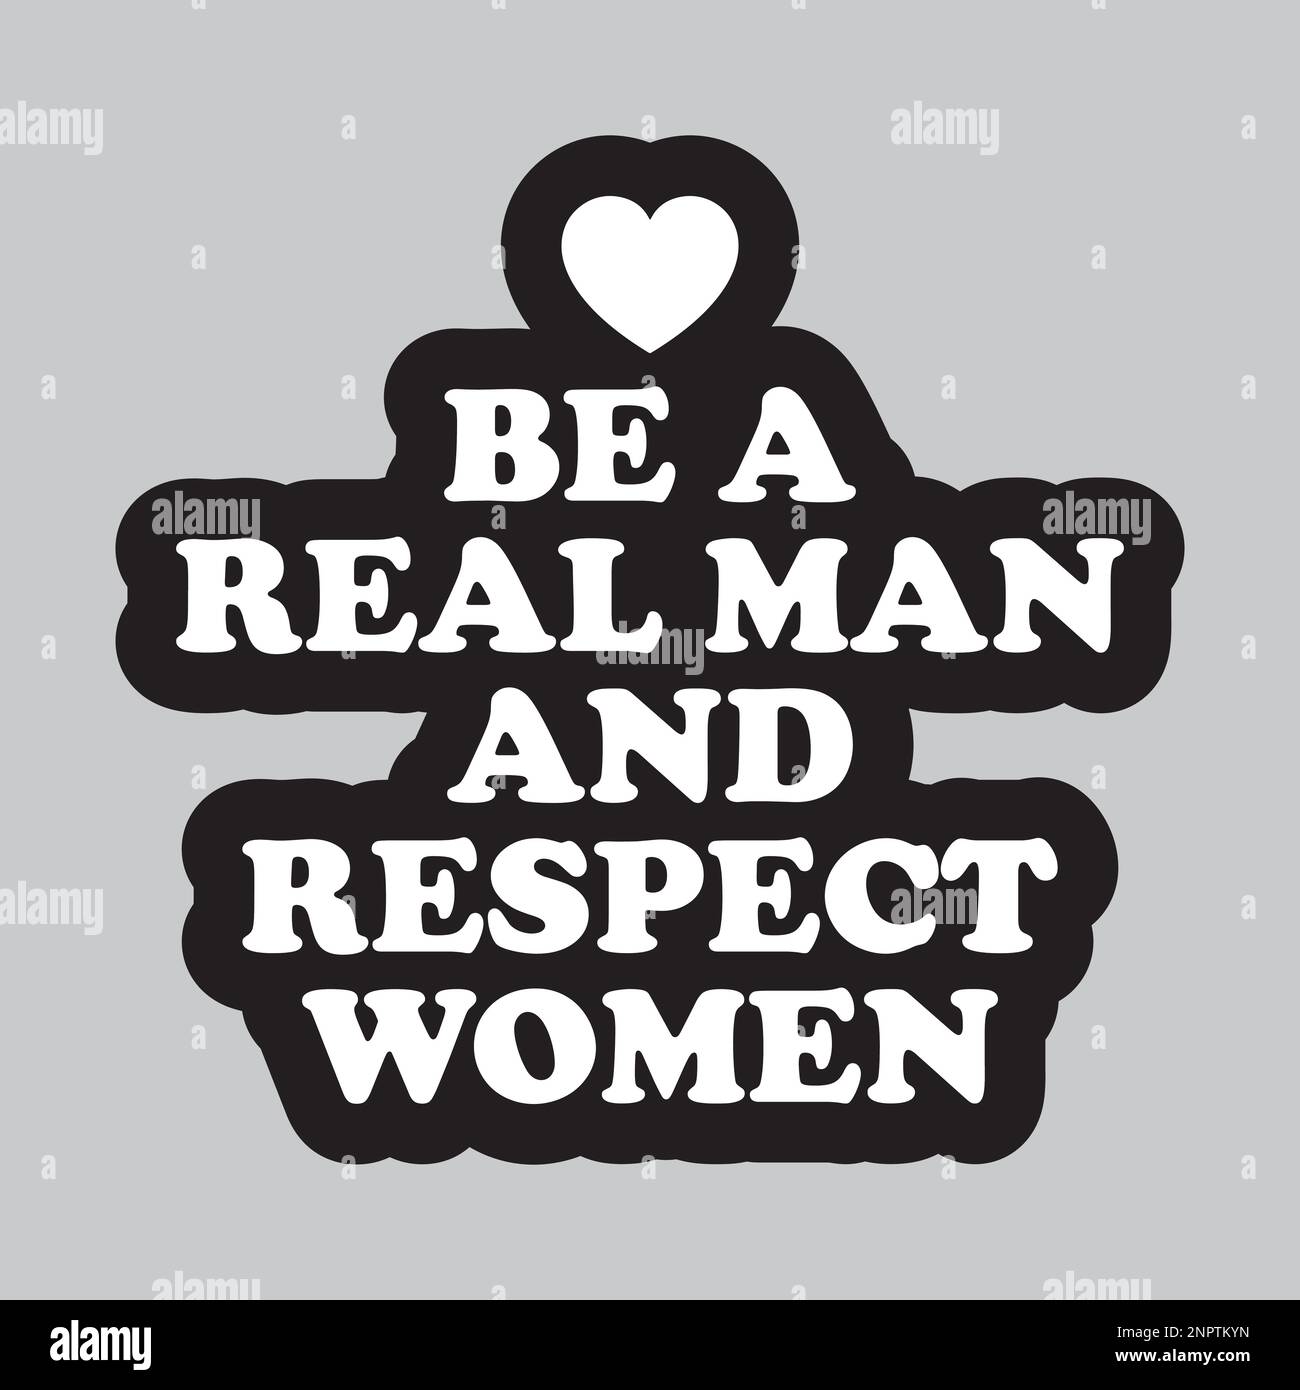 Be a real man and respect women. Respect women quote with heart ...